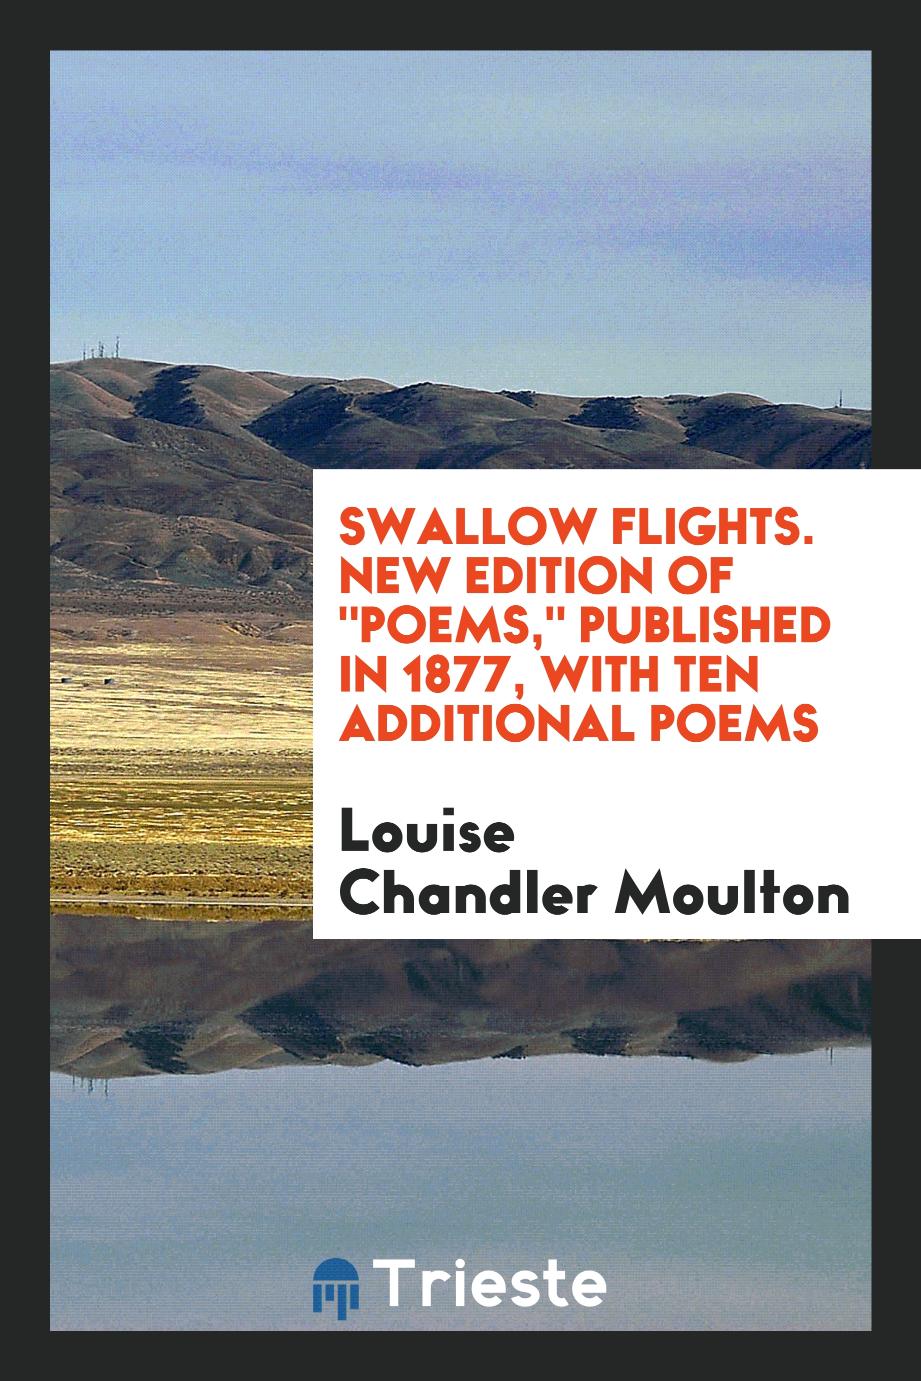 Swallow Flights. New Edition Of "Poems," Published in 1877, with Ten Additional Poems